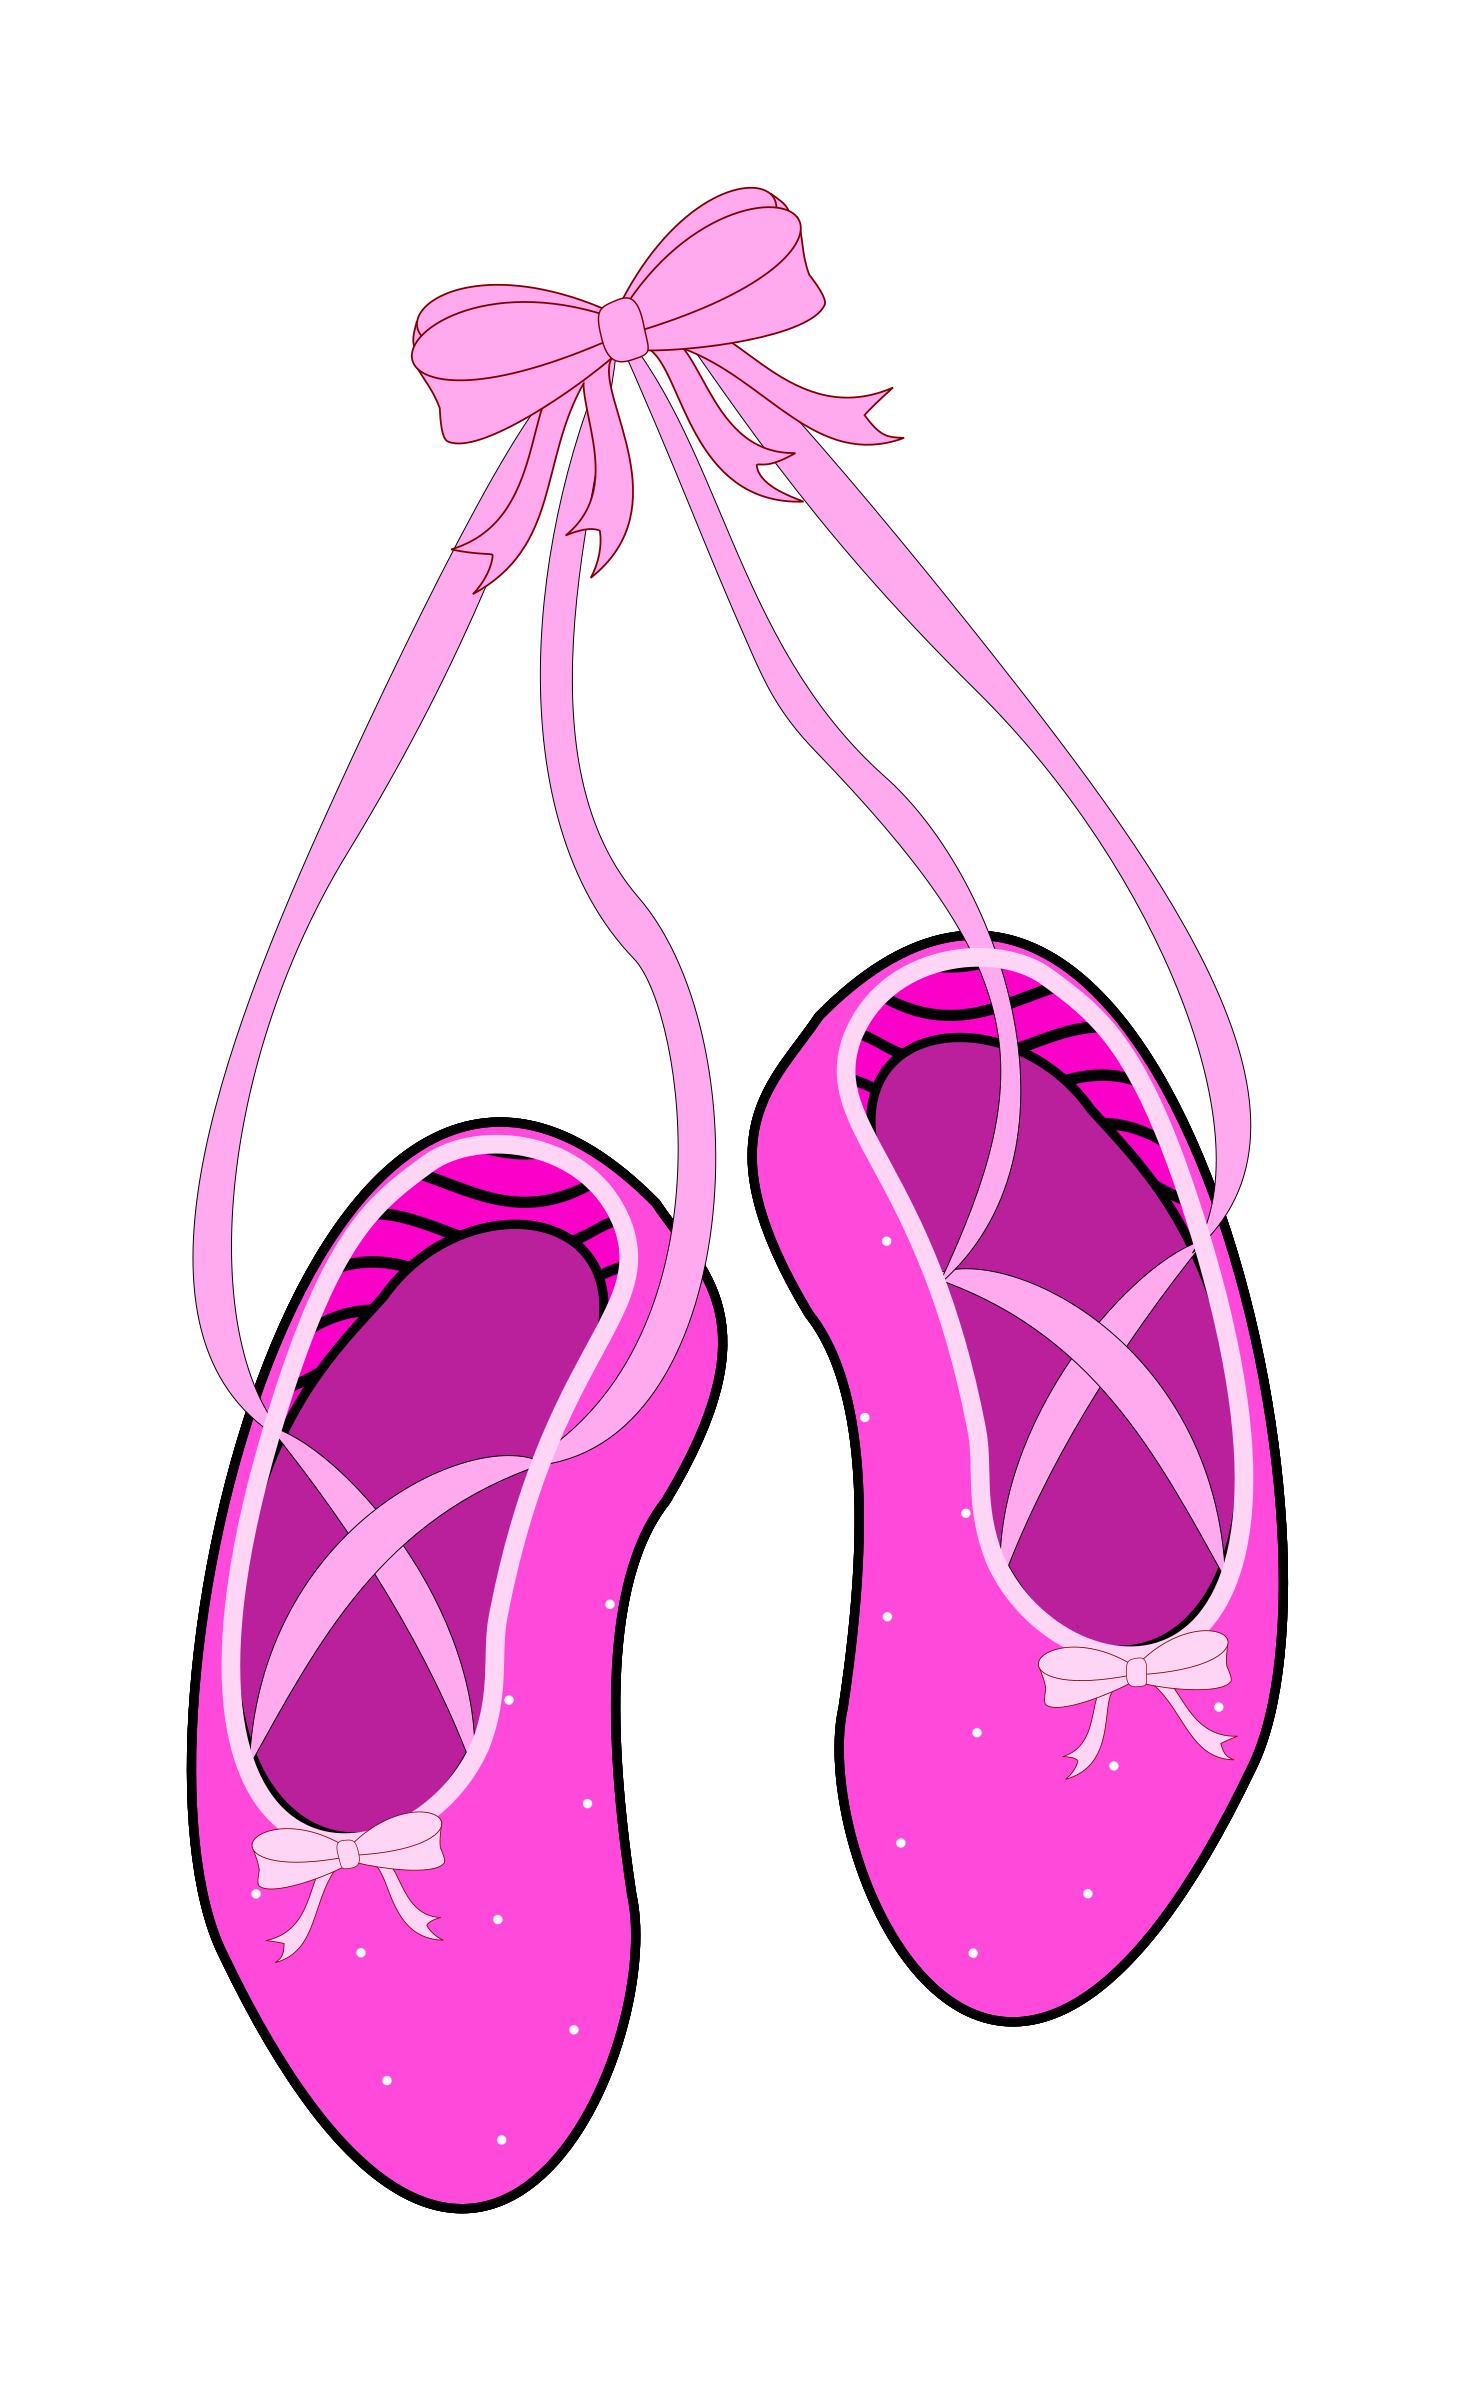 Pictures Of Ballet Slippers - ClipArt Best